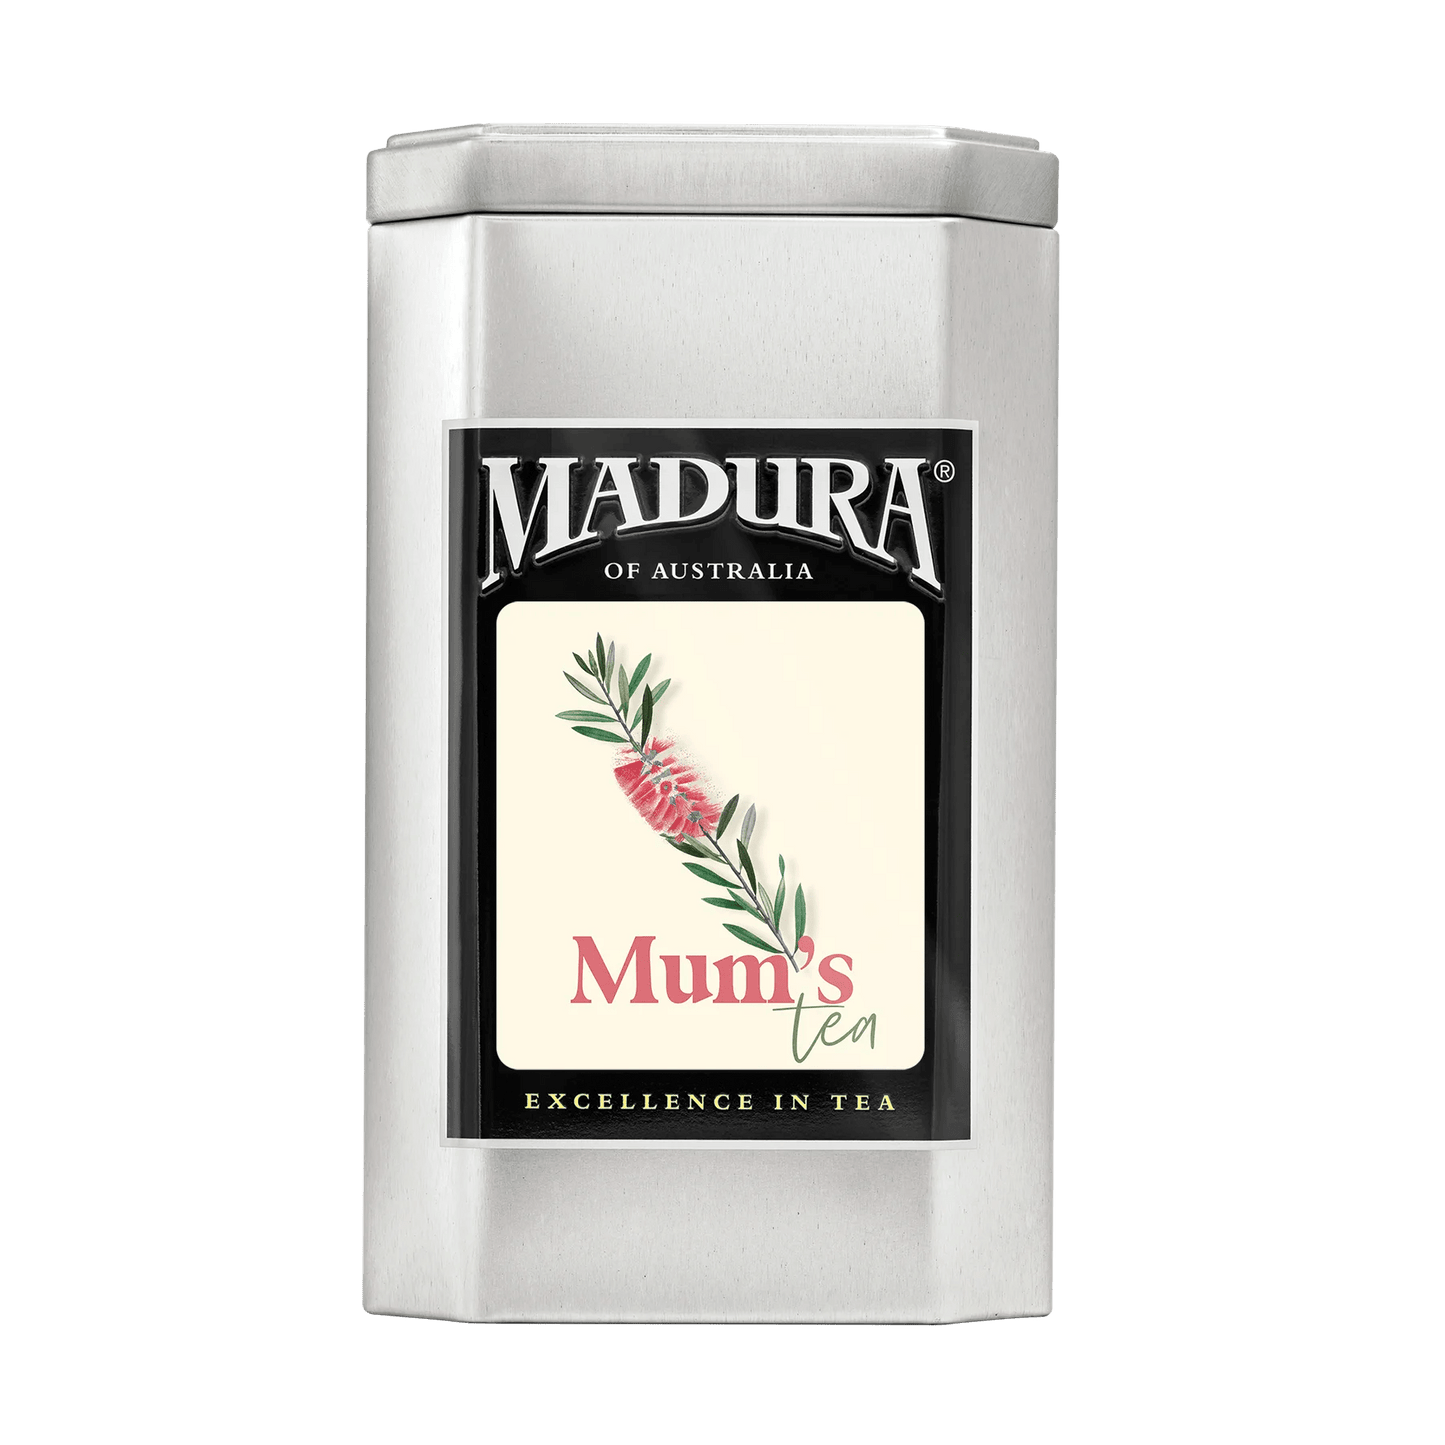 44 Tea Bags Caddy with Mothers Day Floral 3 Label - Madura Tea